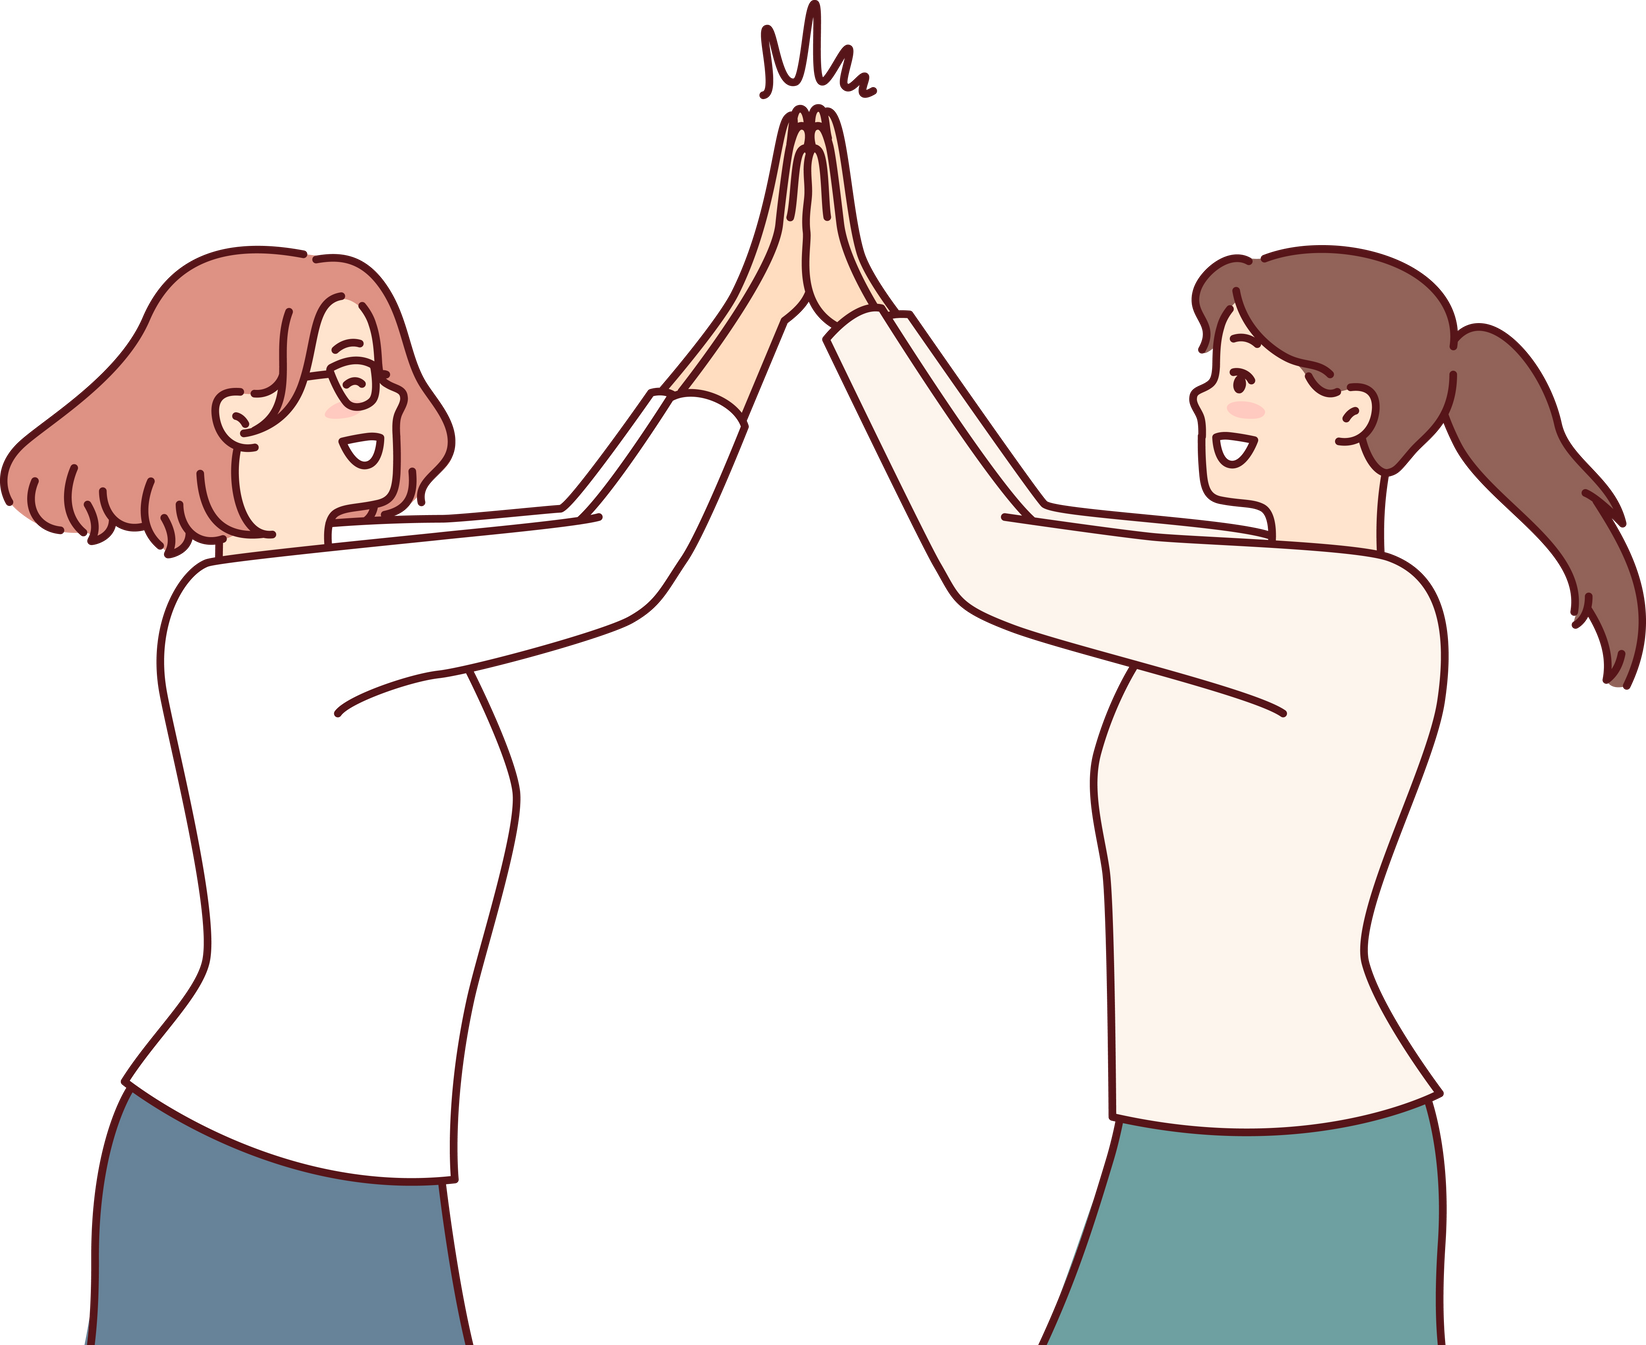 Two Happy Women Rejoice High Five Greet Each Other after Long-Awaited Meeting. Vector Image